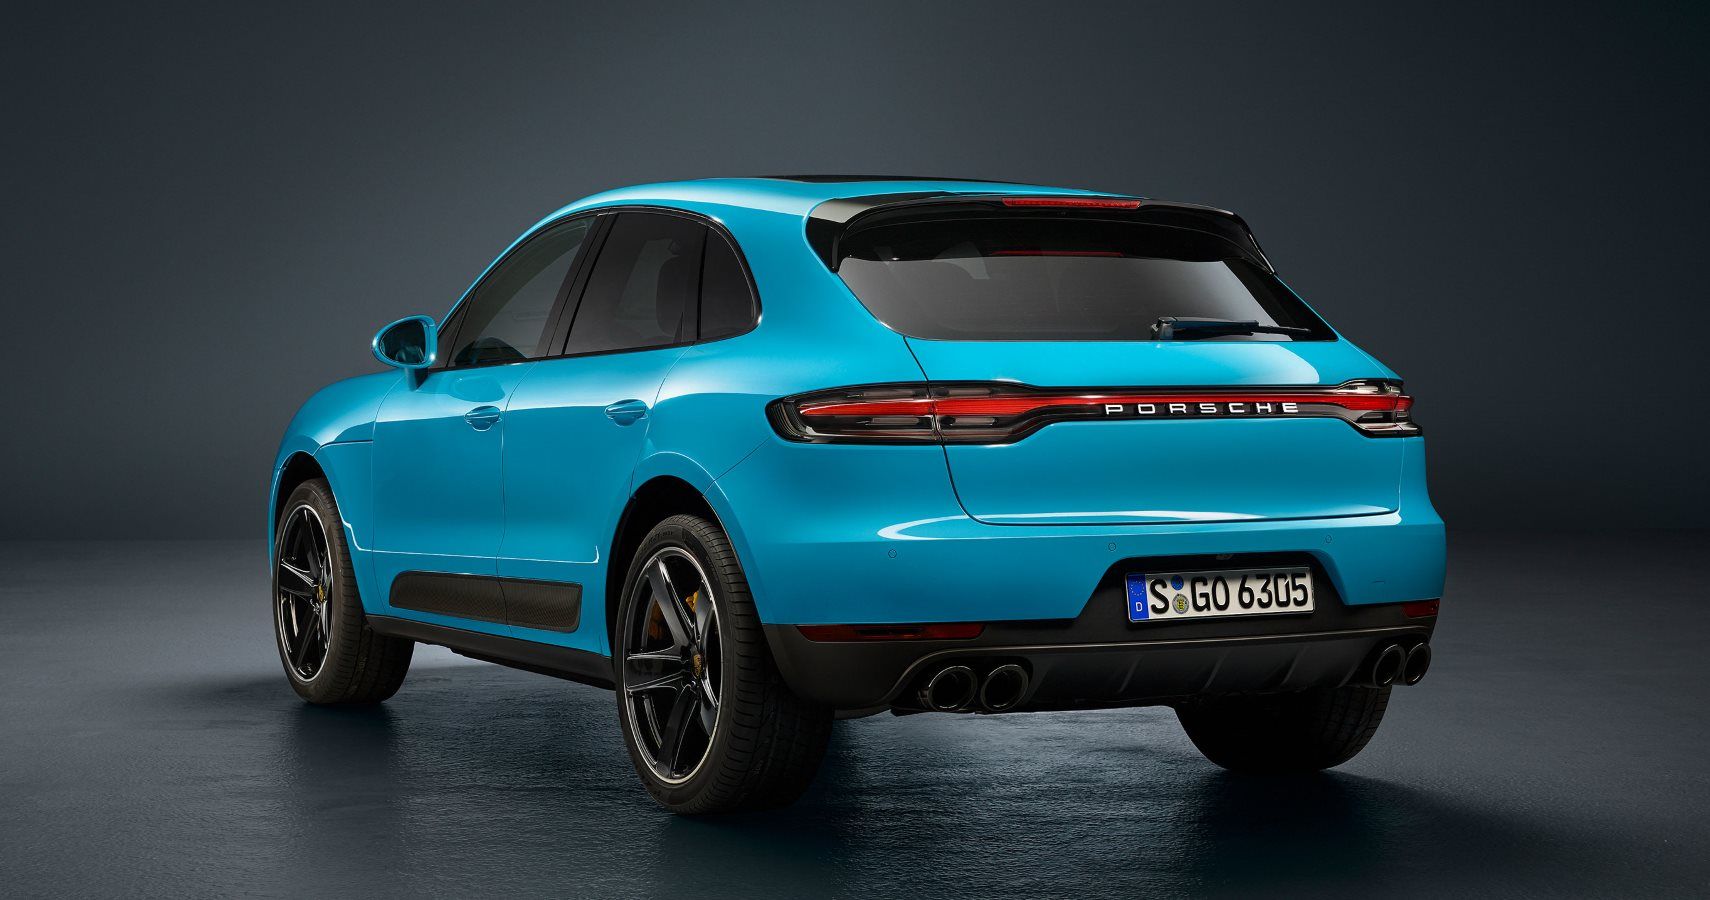 The Refreshed Porsche Macan Has Striking Changes